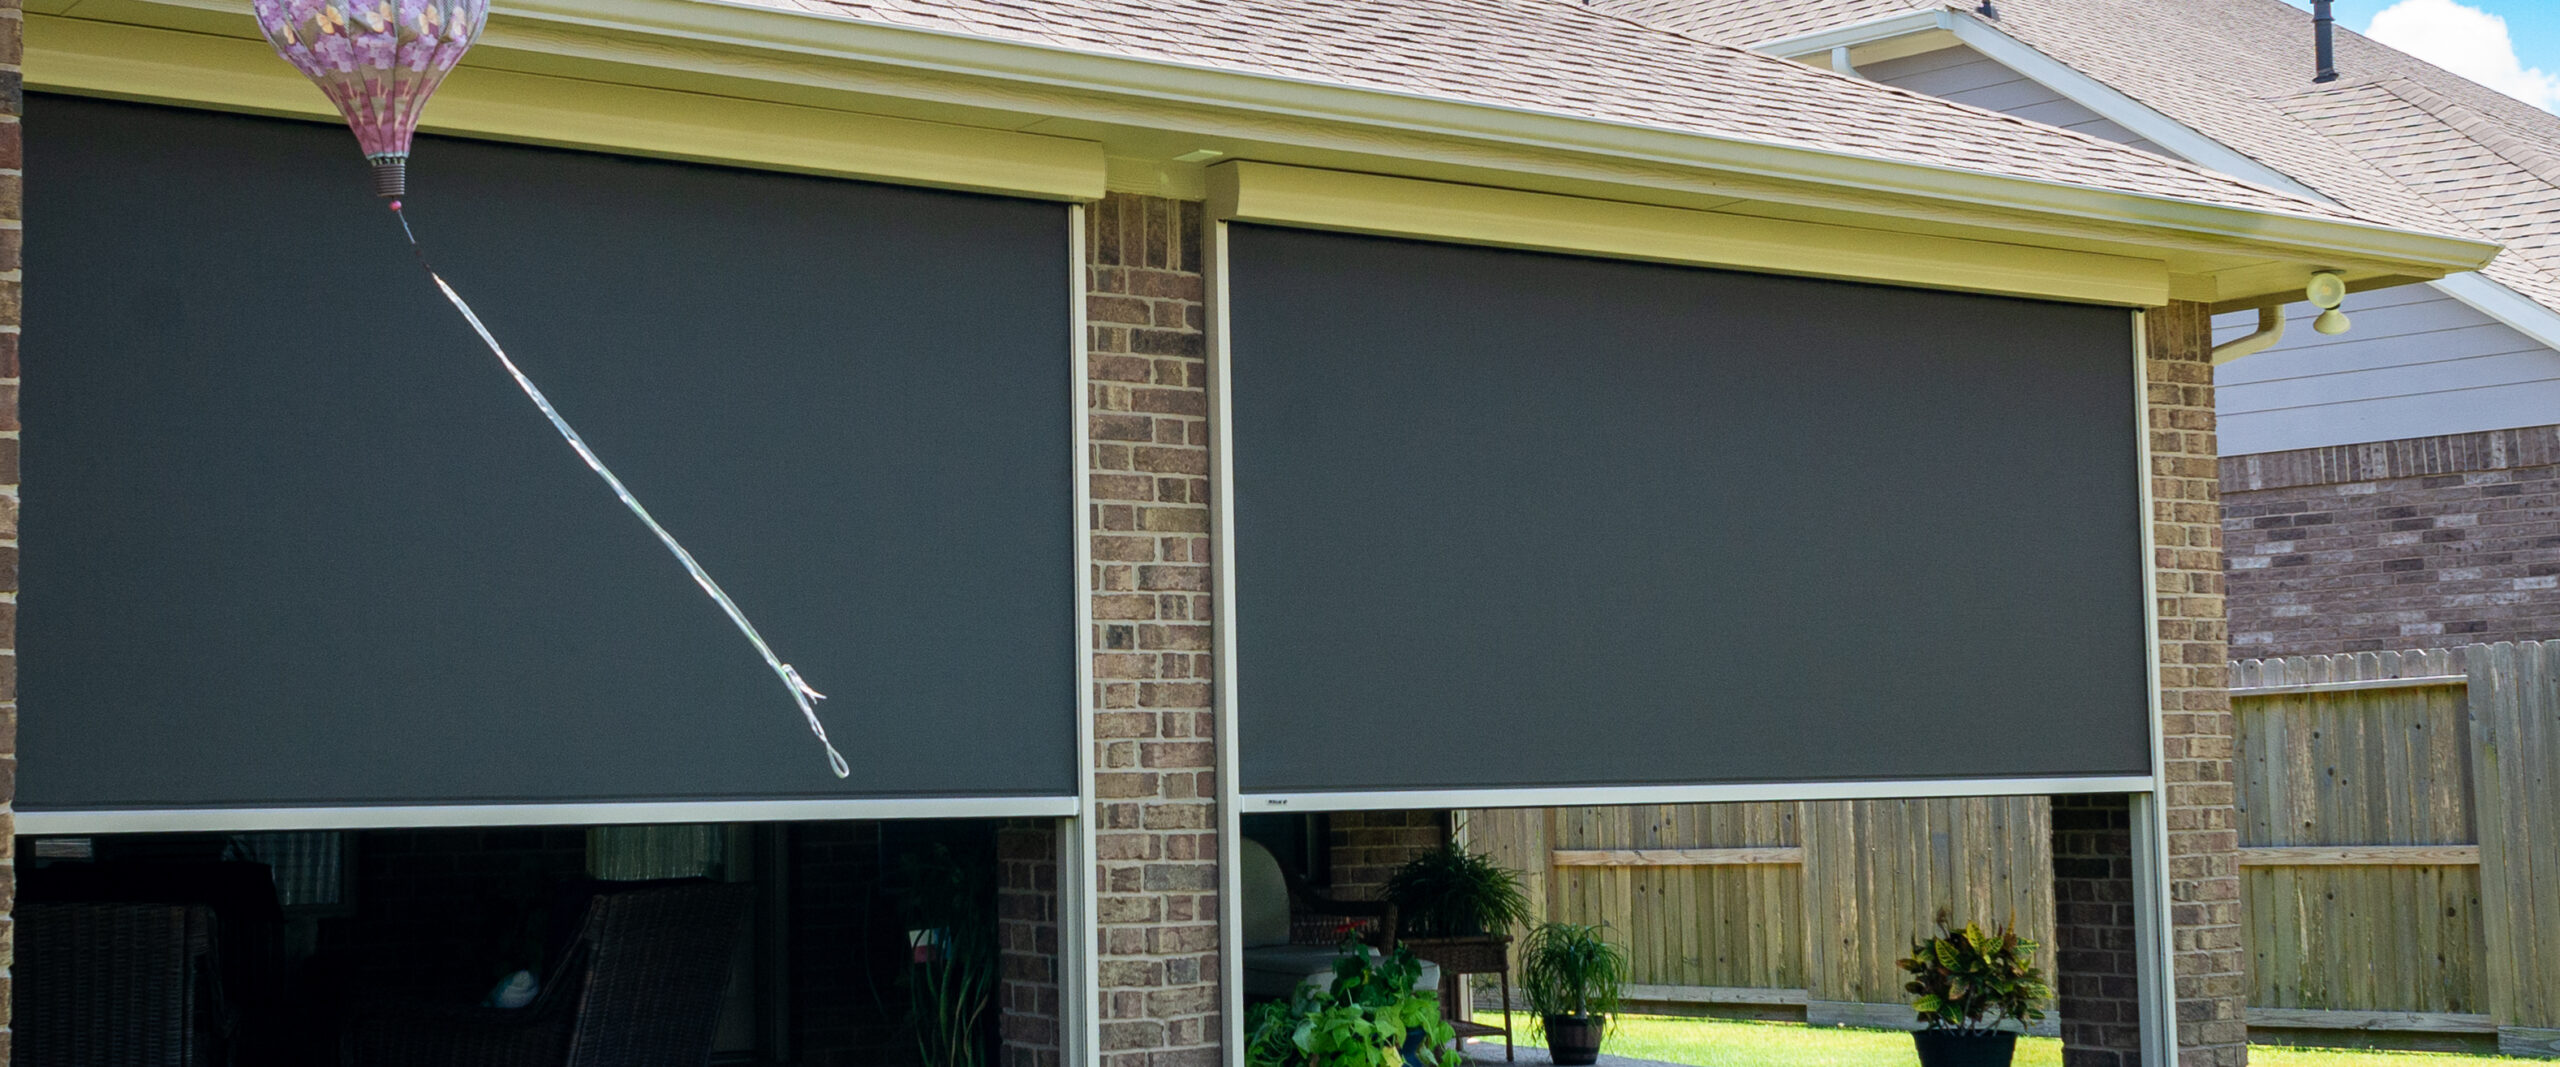 Exterior View of Outdoor Patio Shades